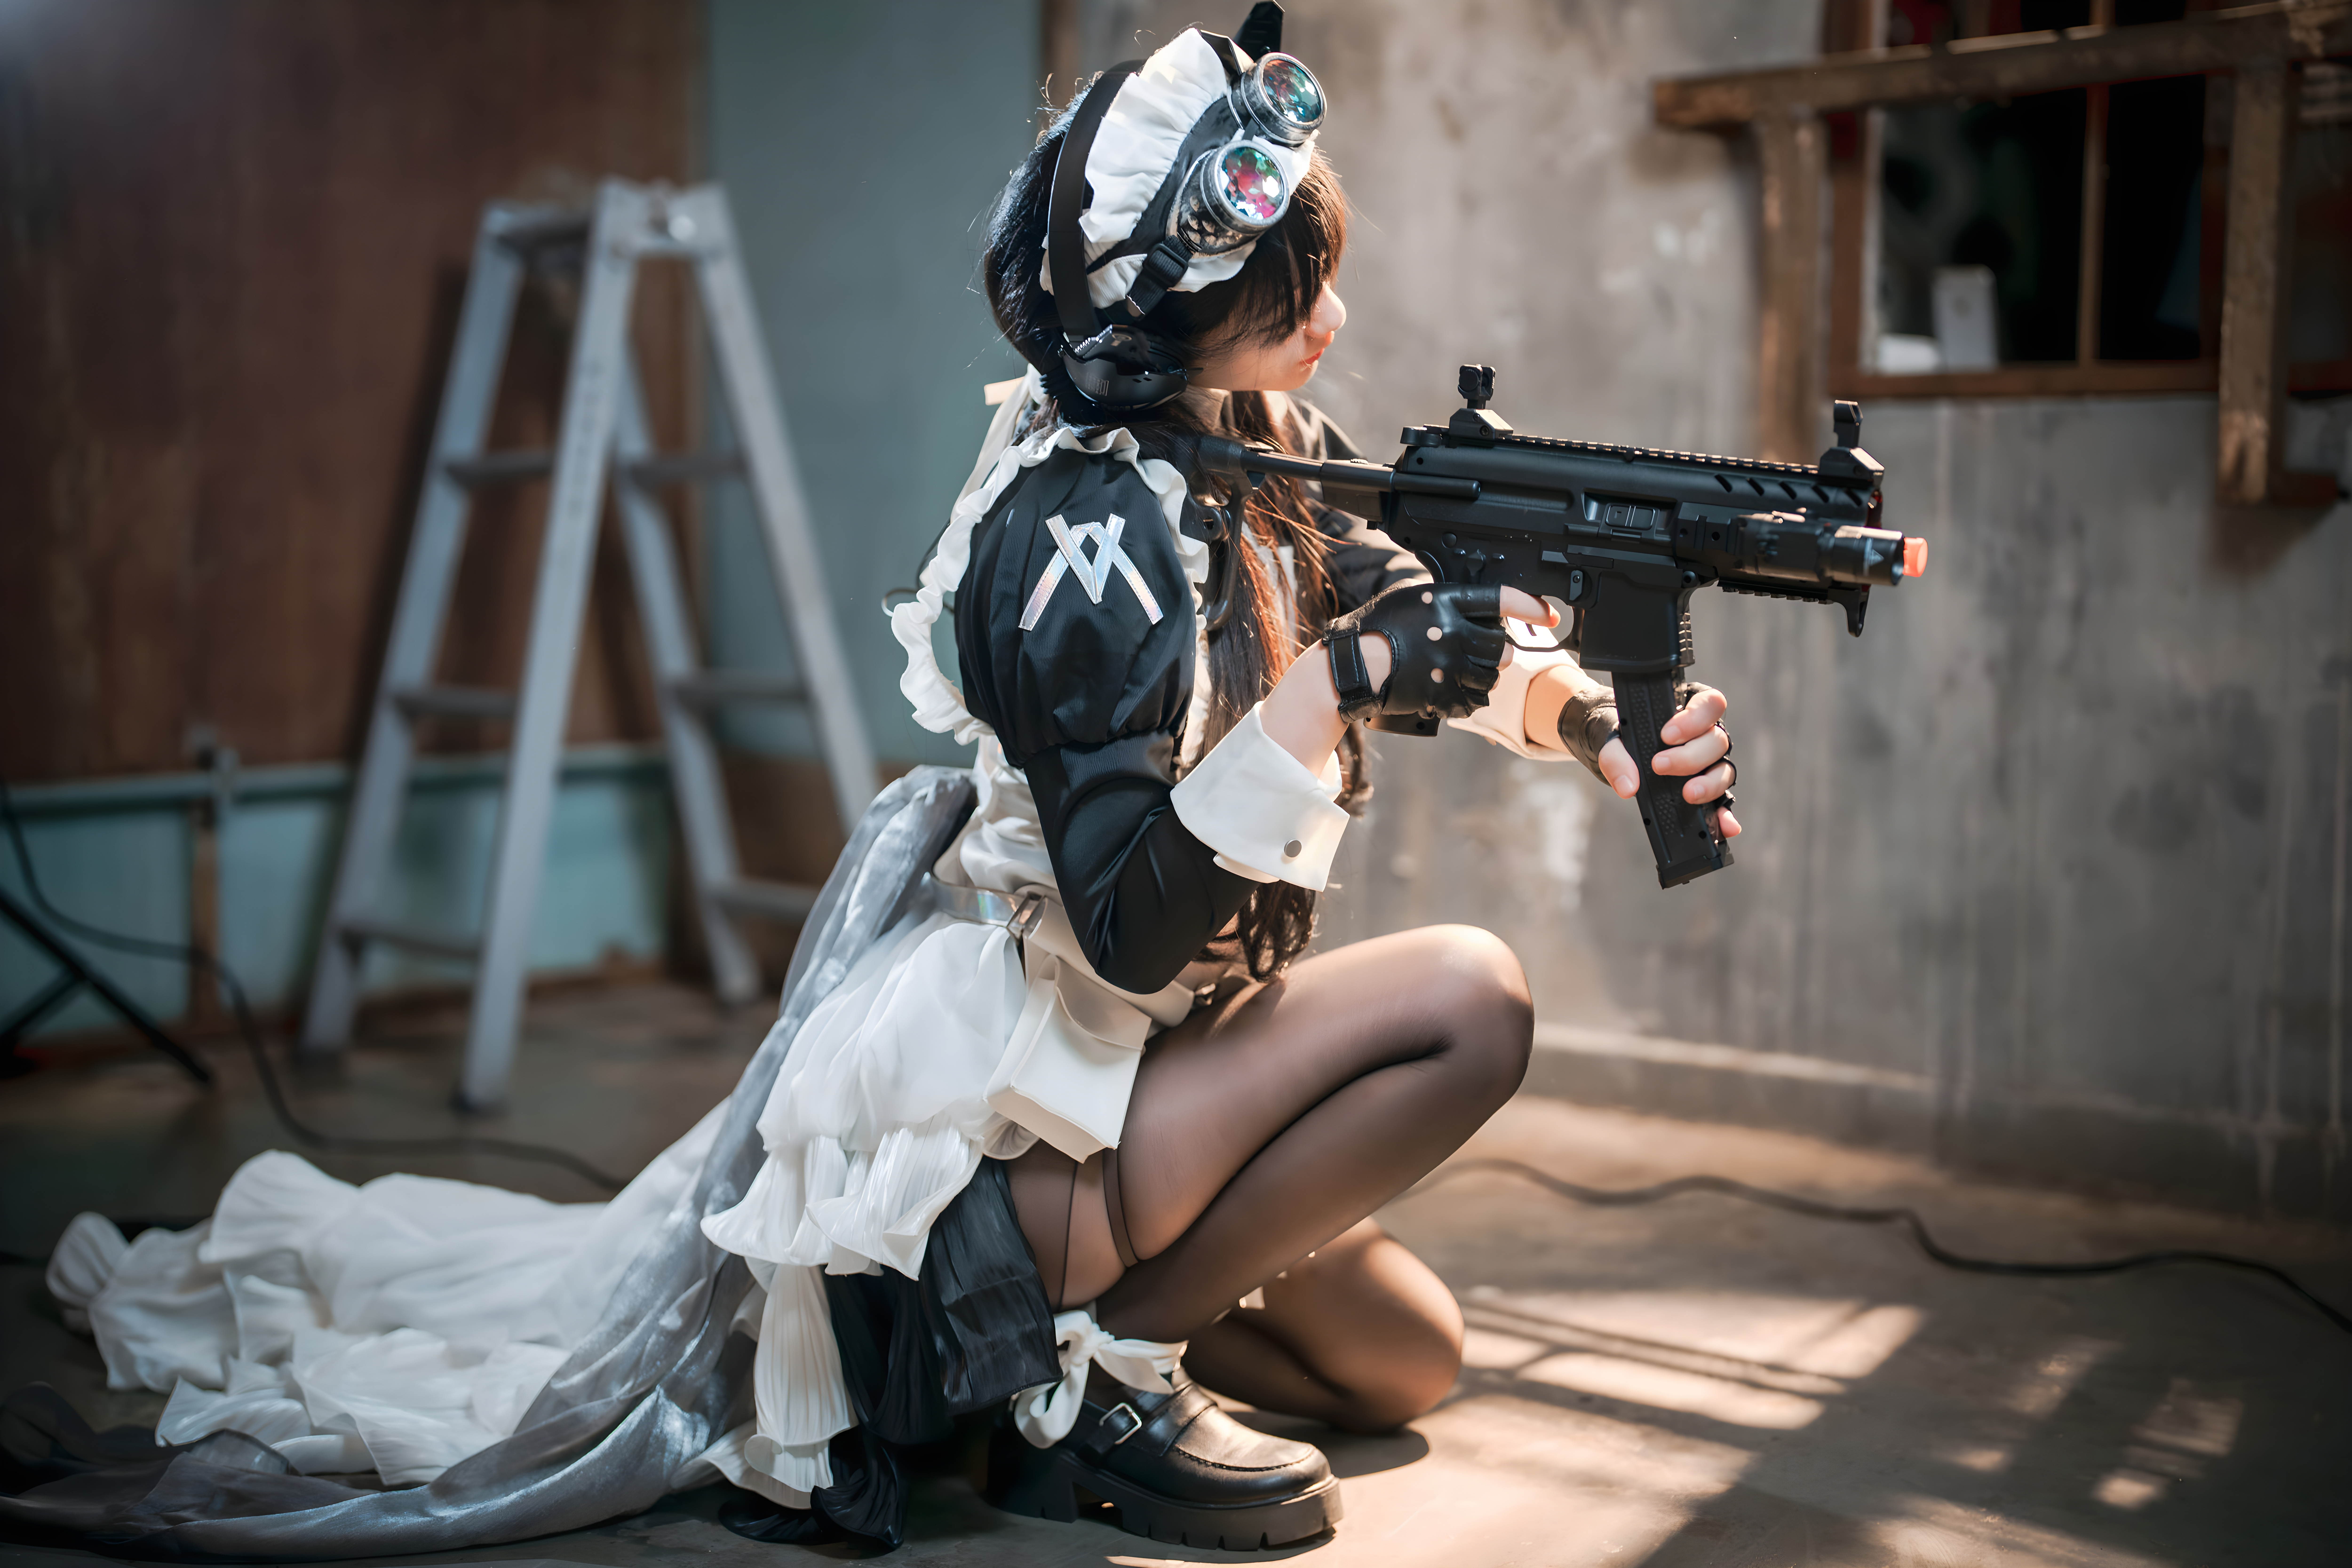 People 10800x7200 maid outfit mpx toy gun Jenny Jia Ni goggles leather gloves stockings kneeling Asian cosplay women submachine gun